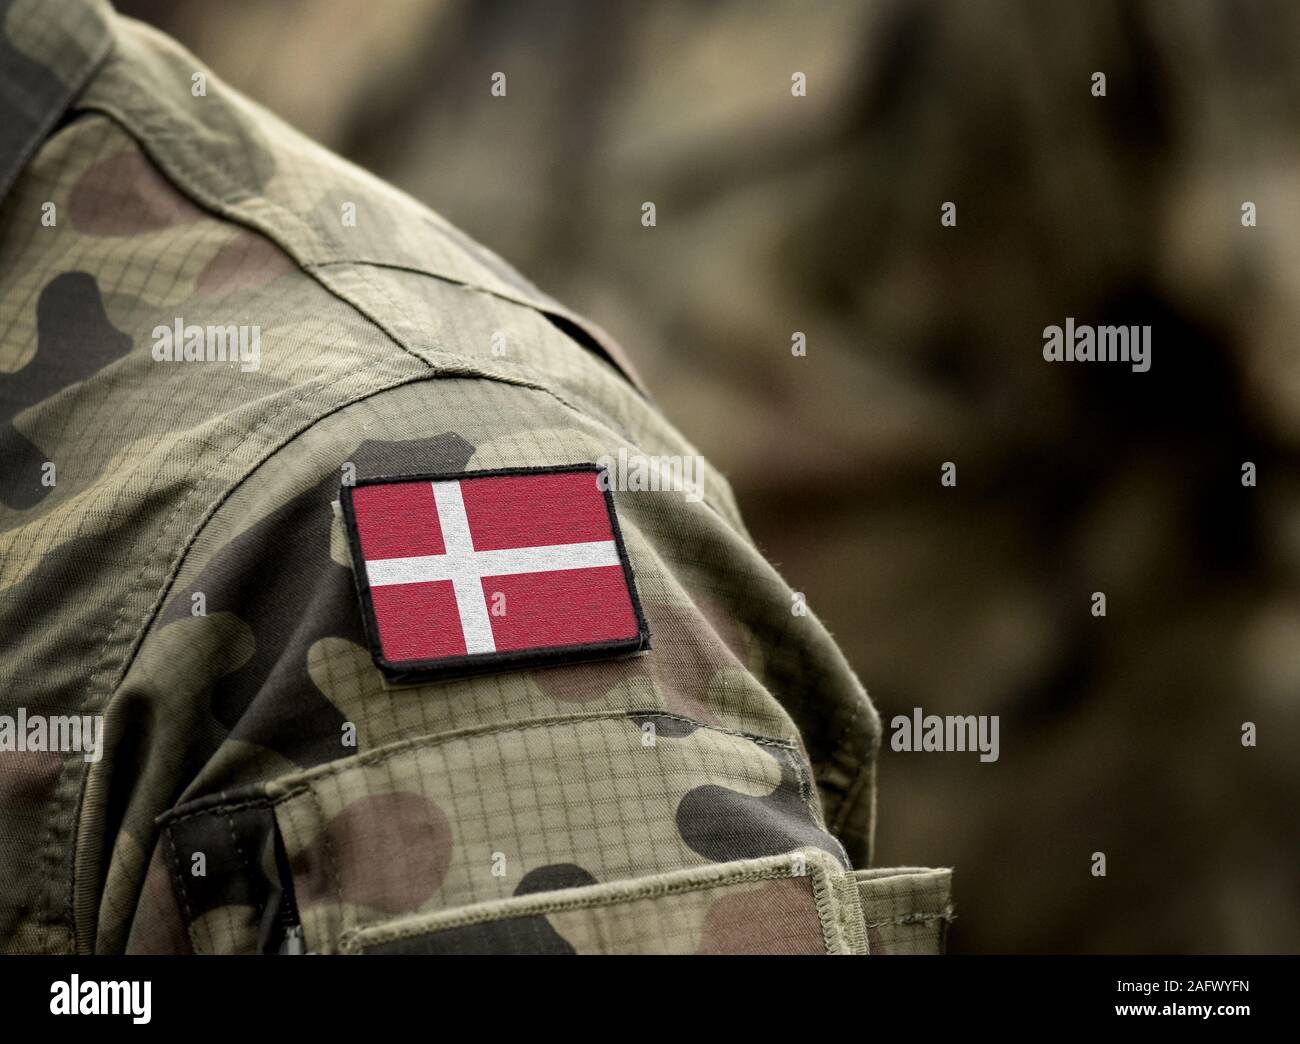 Flag of Denmark on military uniform. Army, armed forces, soldiers. Collage. Stock Photo